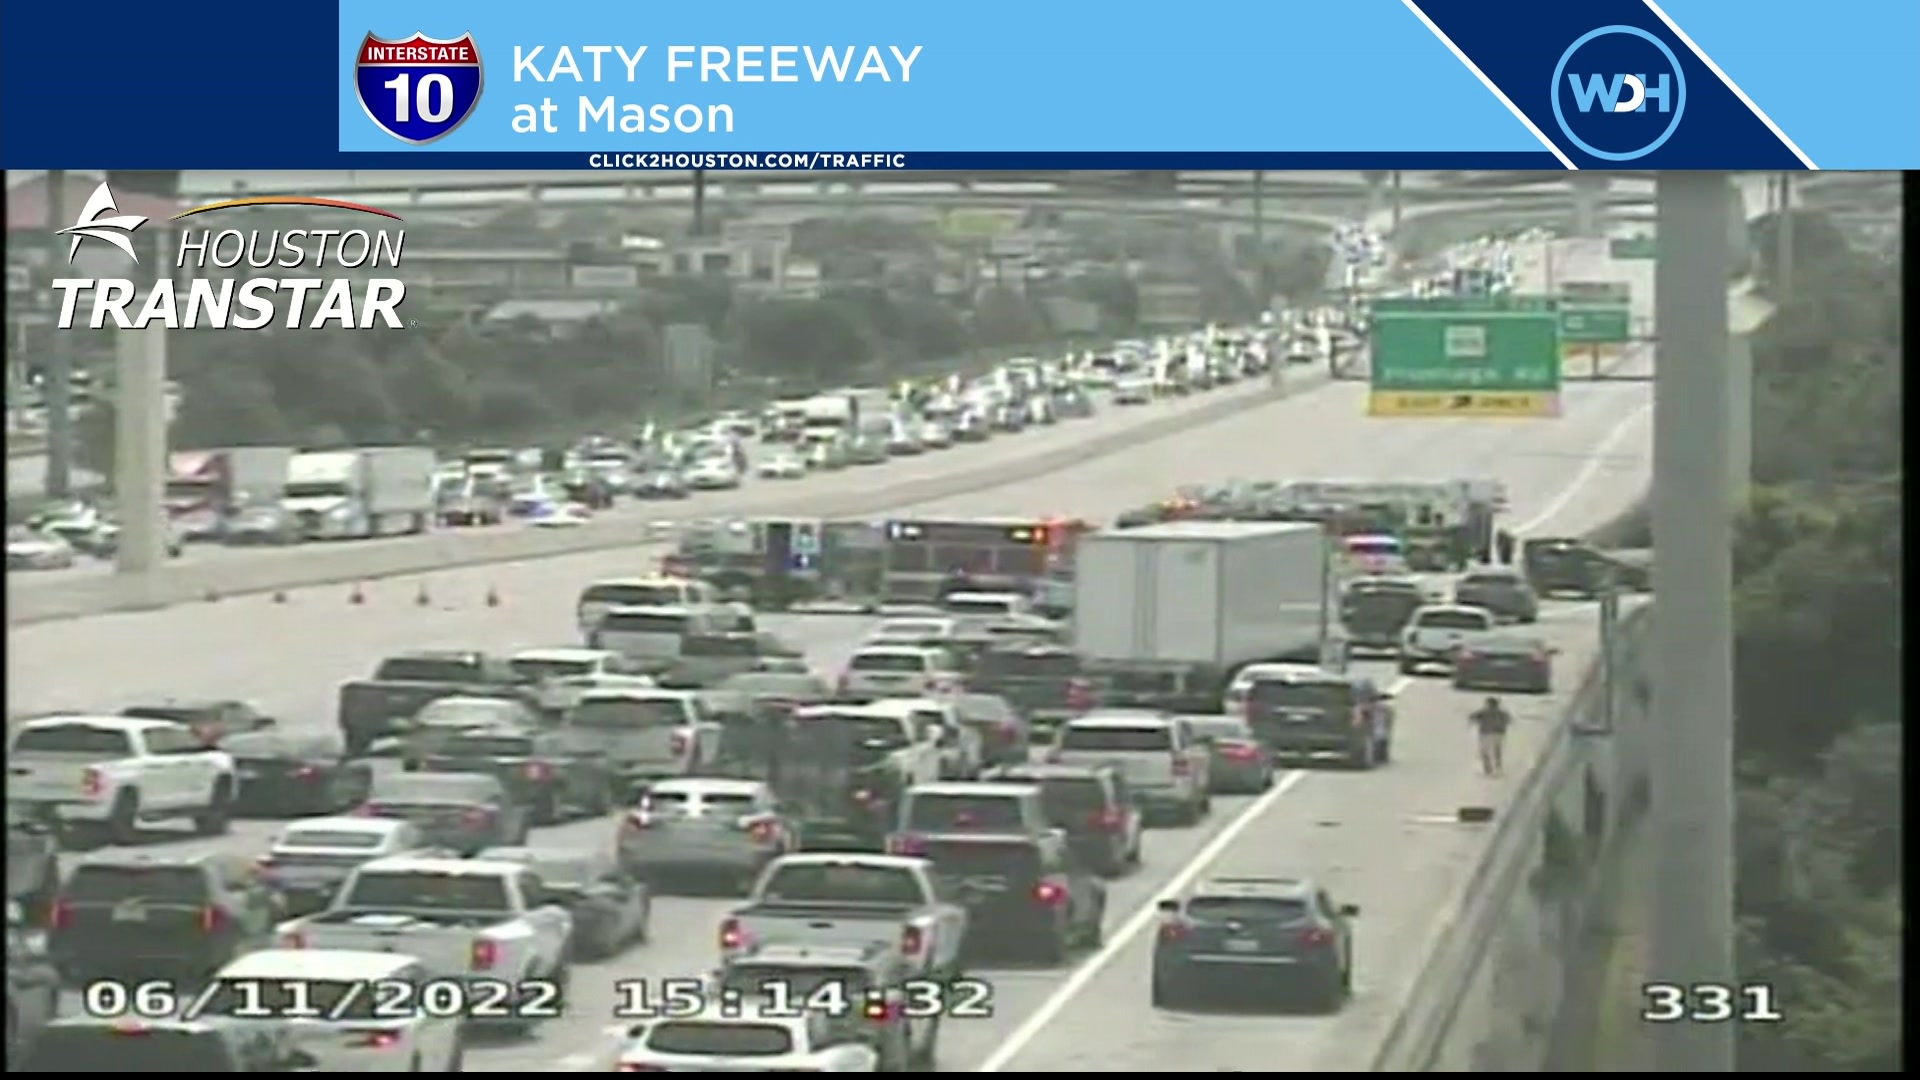 1 person ejected during major crash on Katy Freeway at Mason; Traffic jam reported